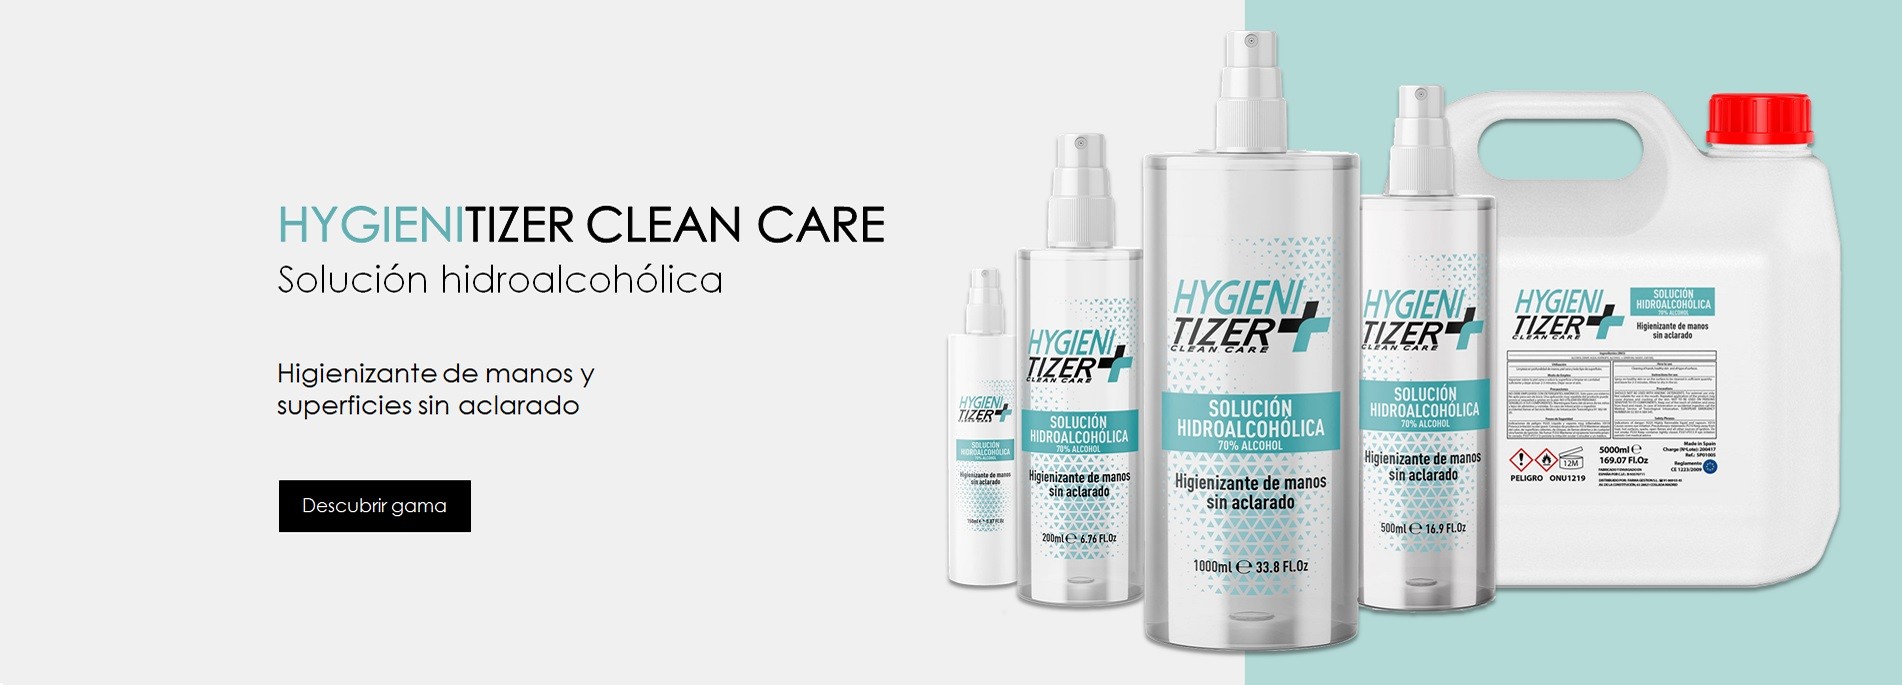 Hygienitizer Clean Care